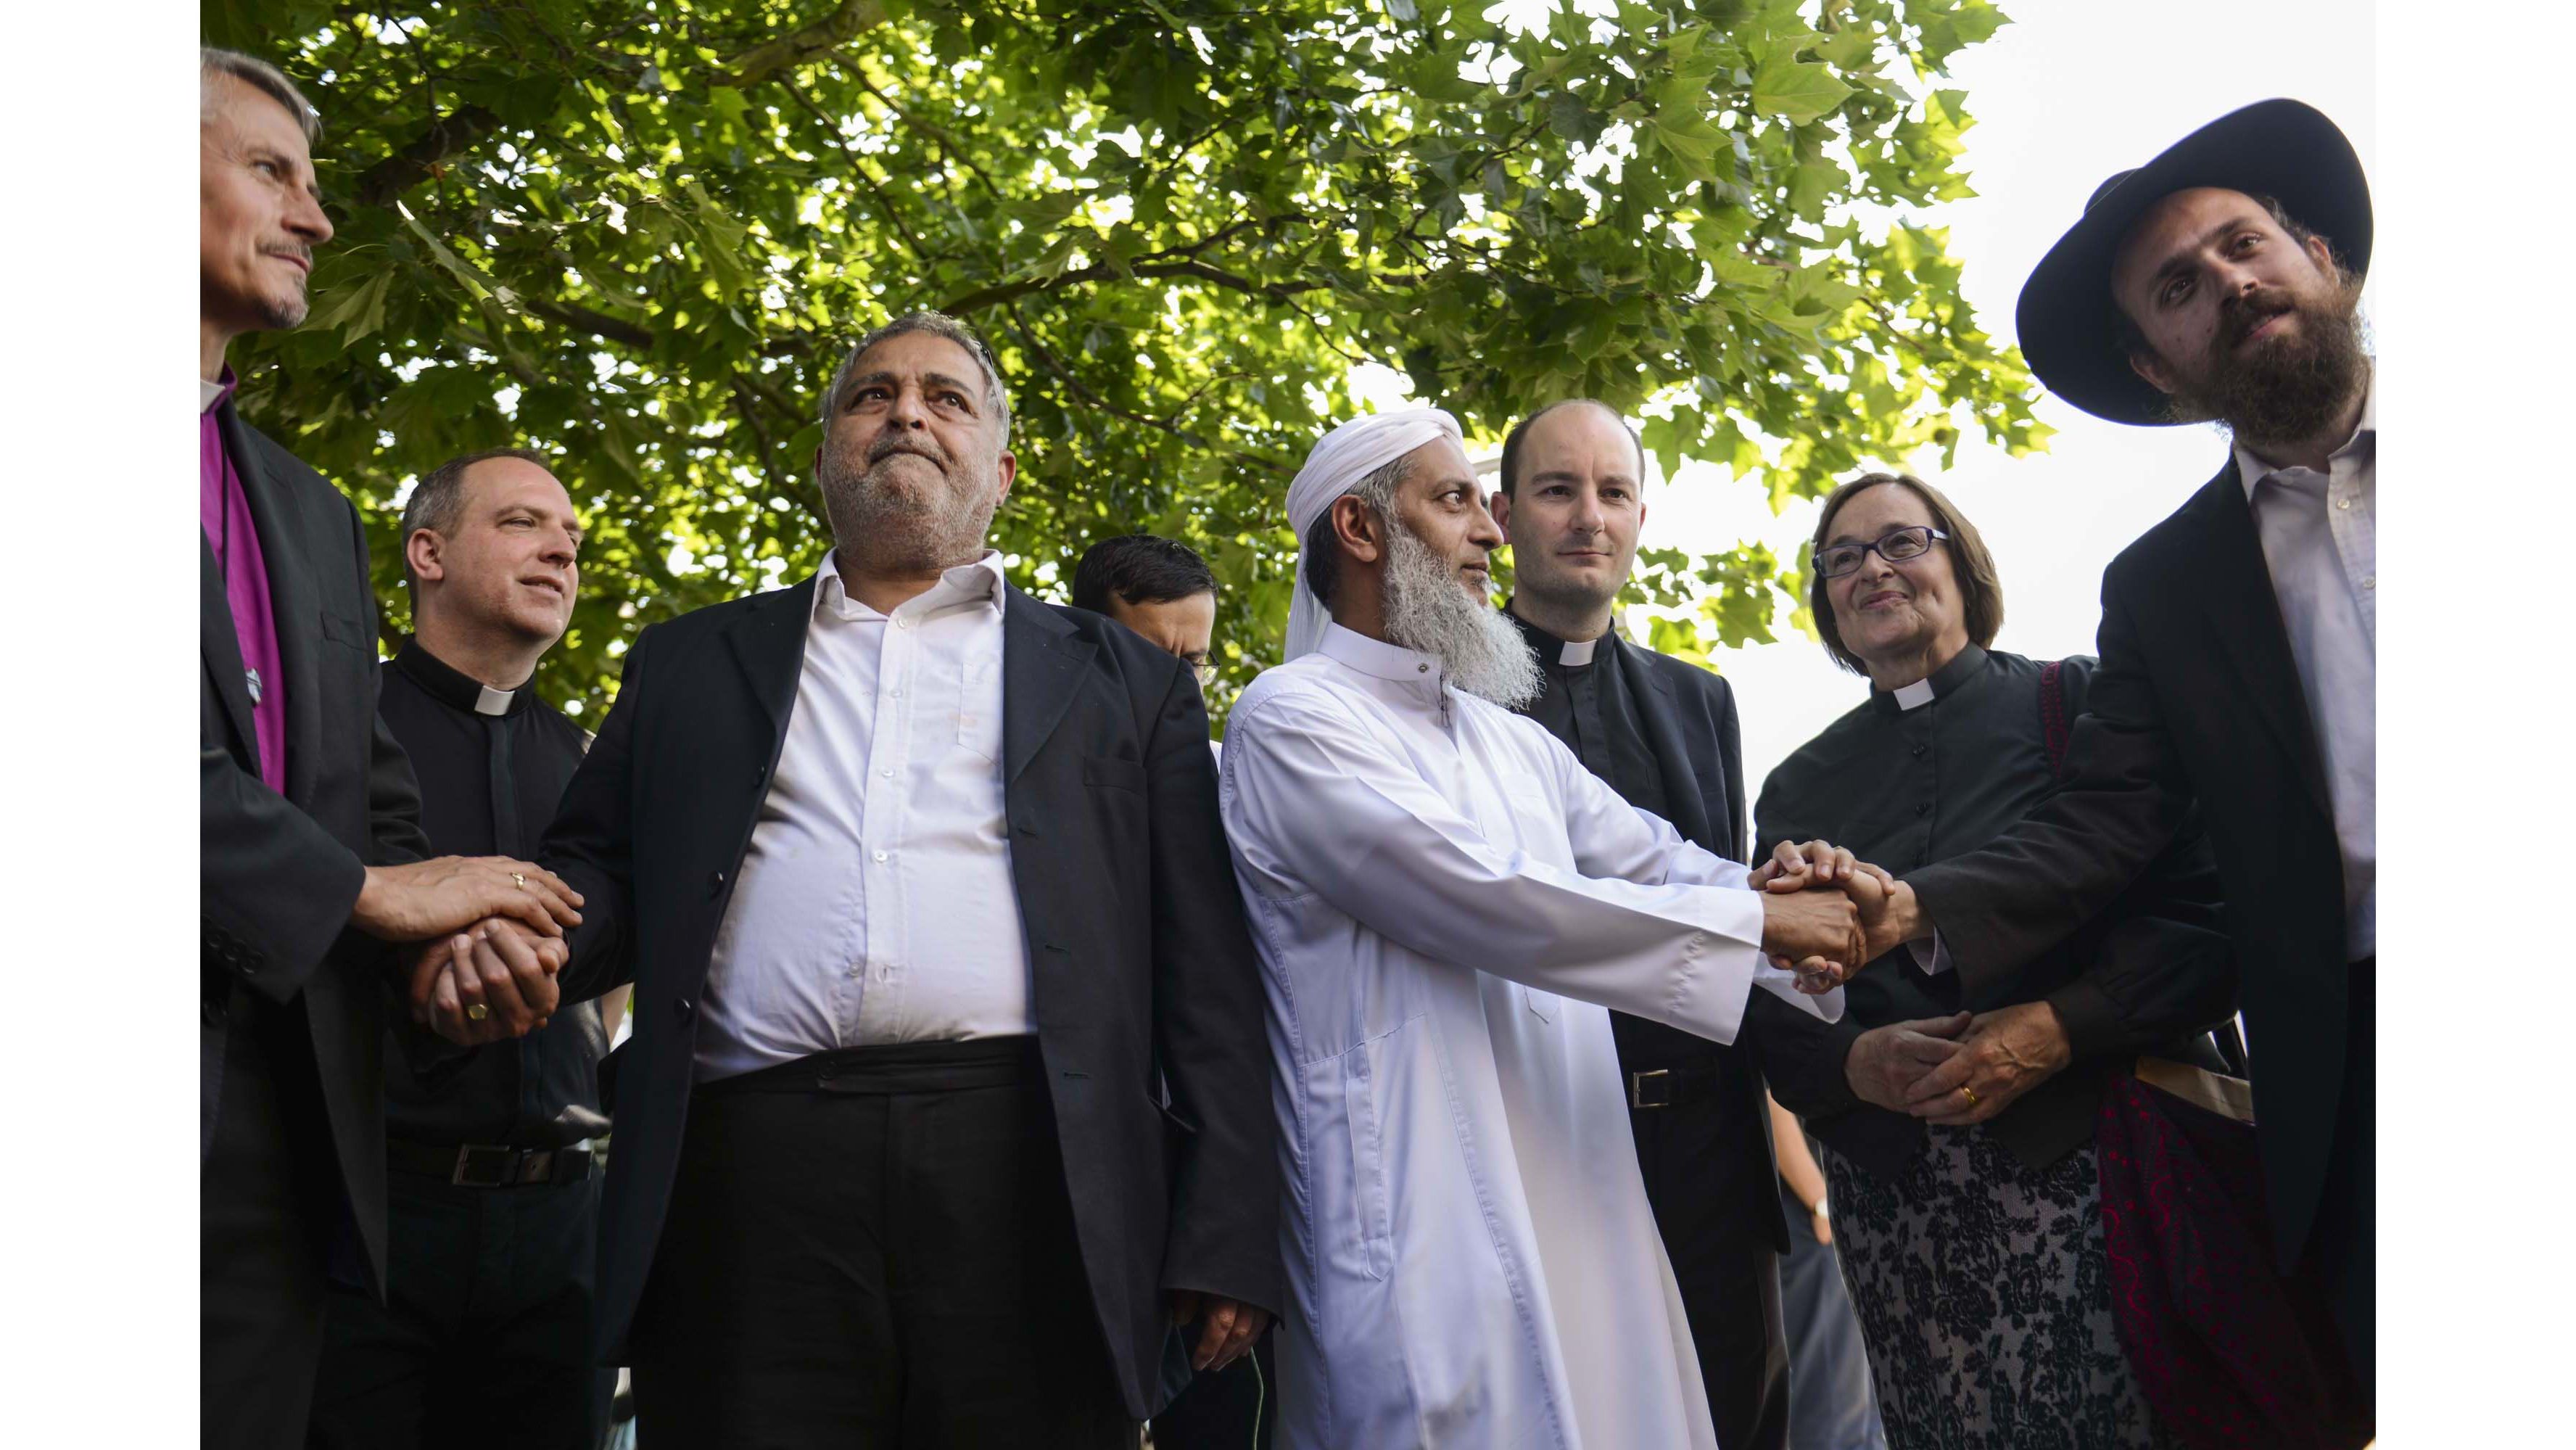 "We had Iftar [breaking fast] at the chief rabbi's home last night. Two hours later, this happens," Yousif al-Khoei, executive director of the Al-Khoei Foundation in London and director of the Centre for Academic Shi'a Studies, said. "We cannot allow these extremists to divide us."